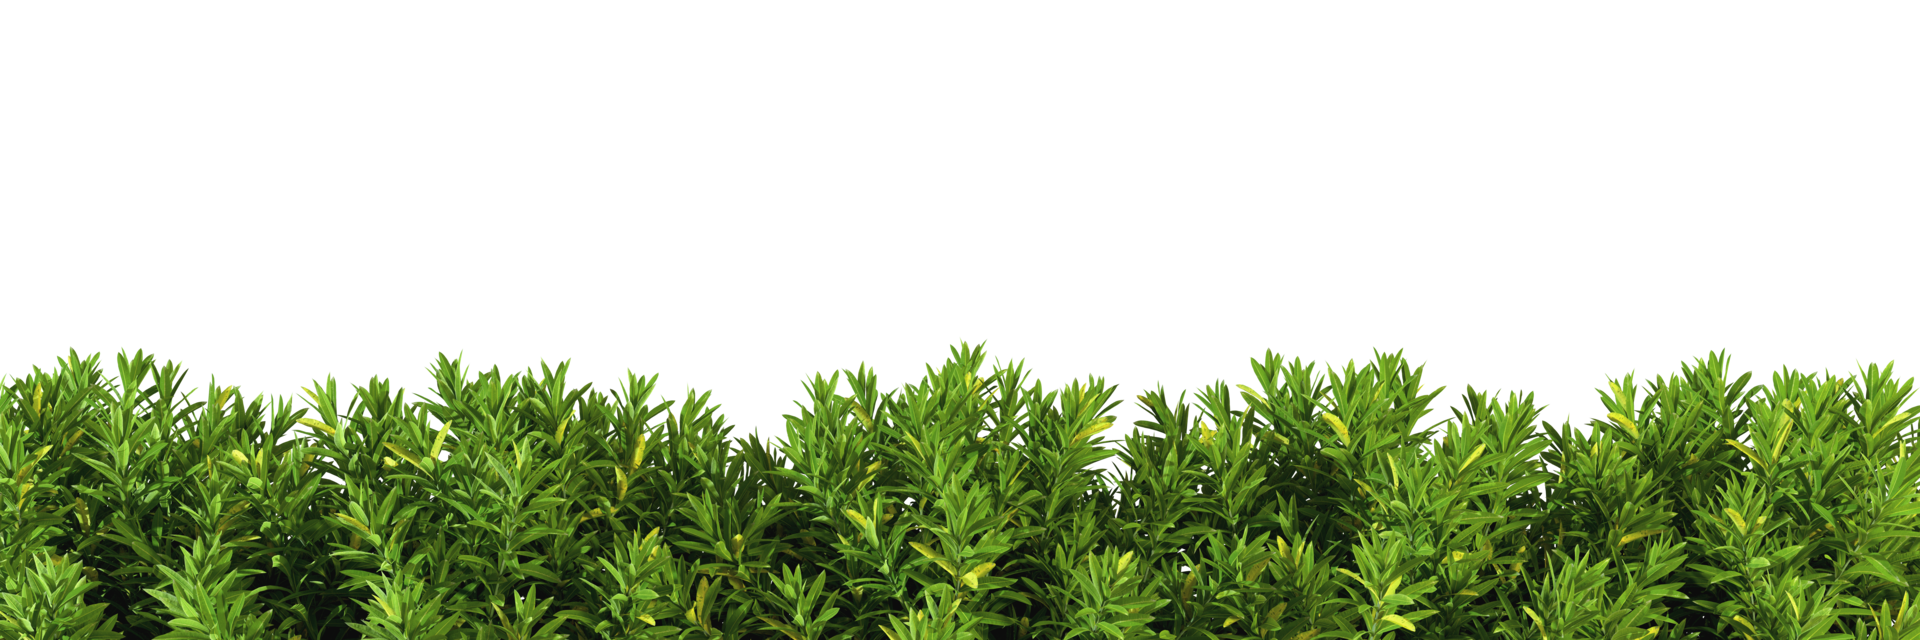 Shrubs green plants fence line cut out backgrounds 3d rendering file png